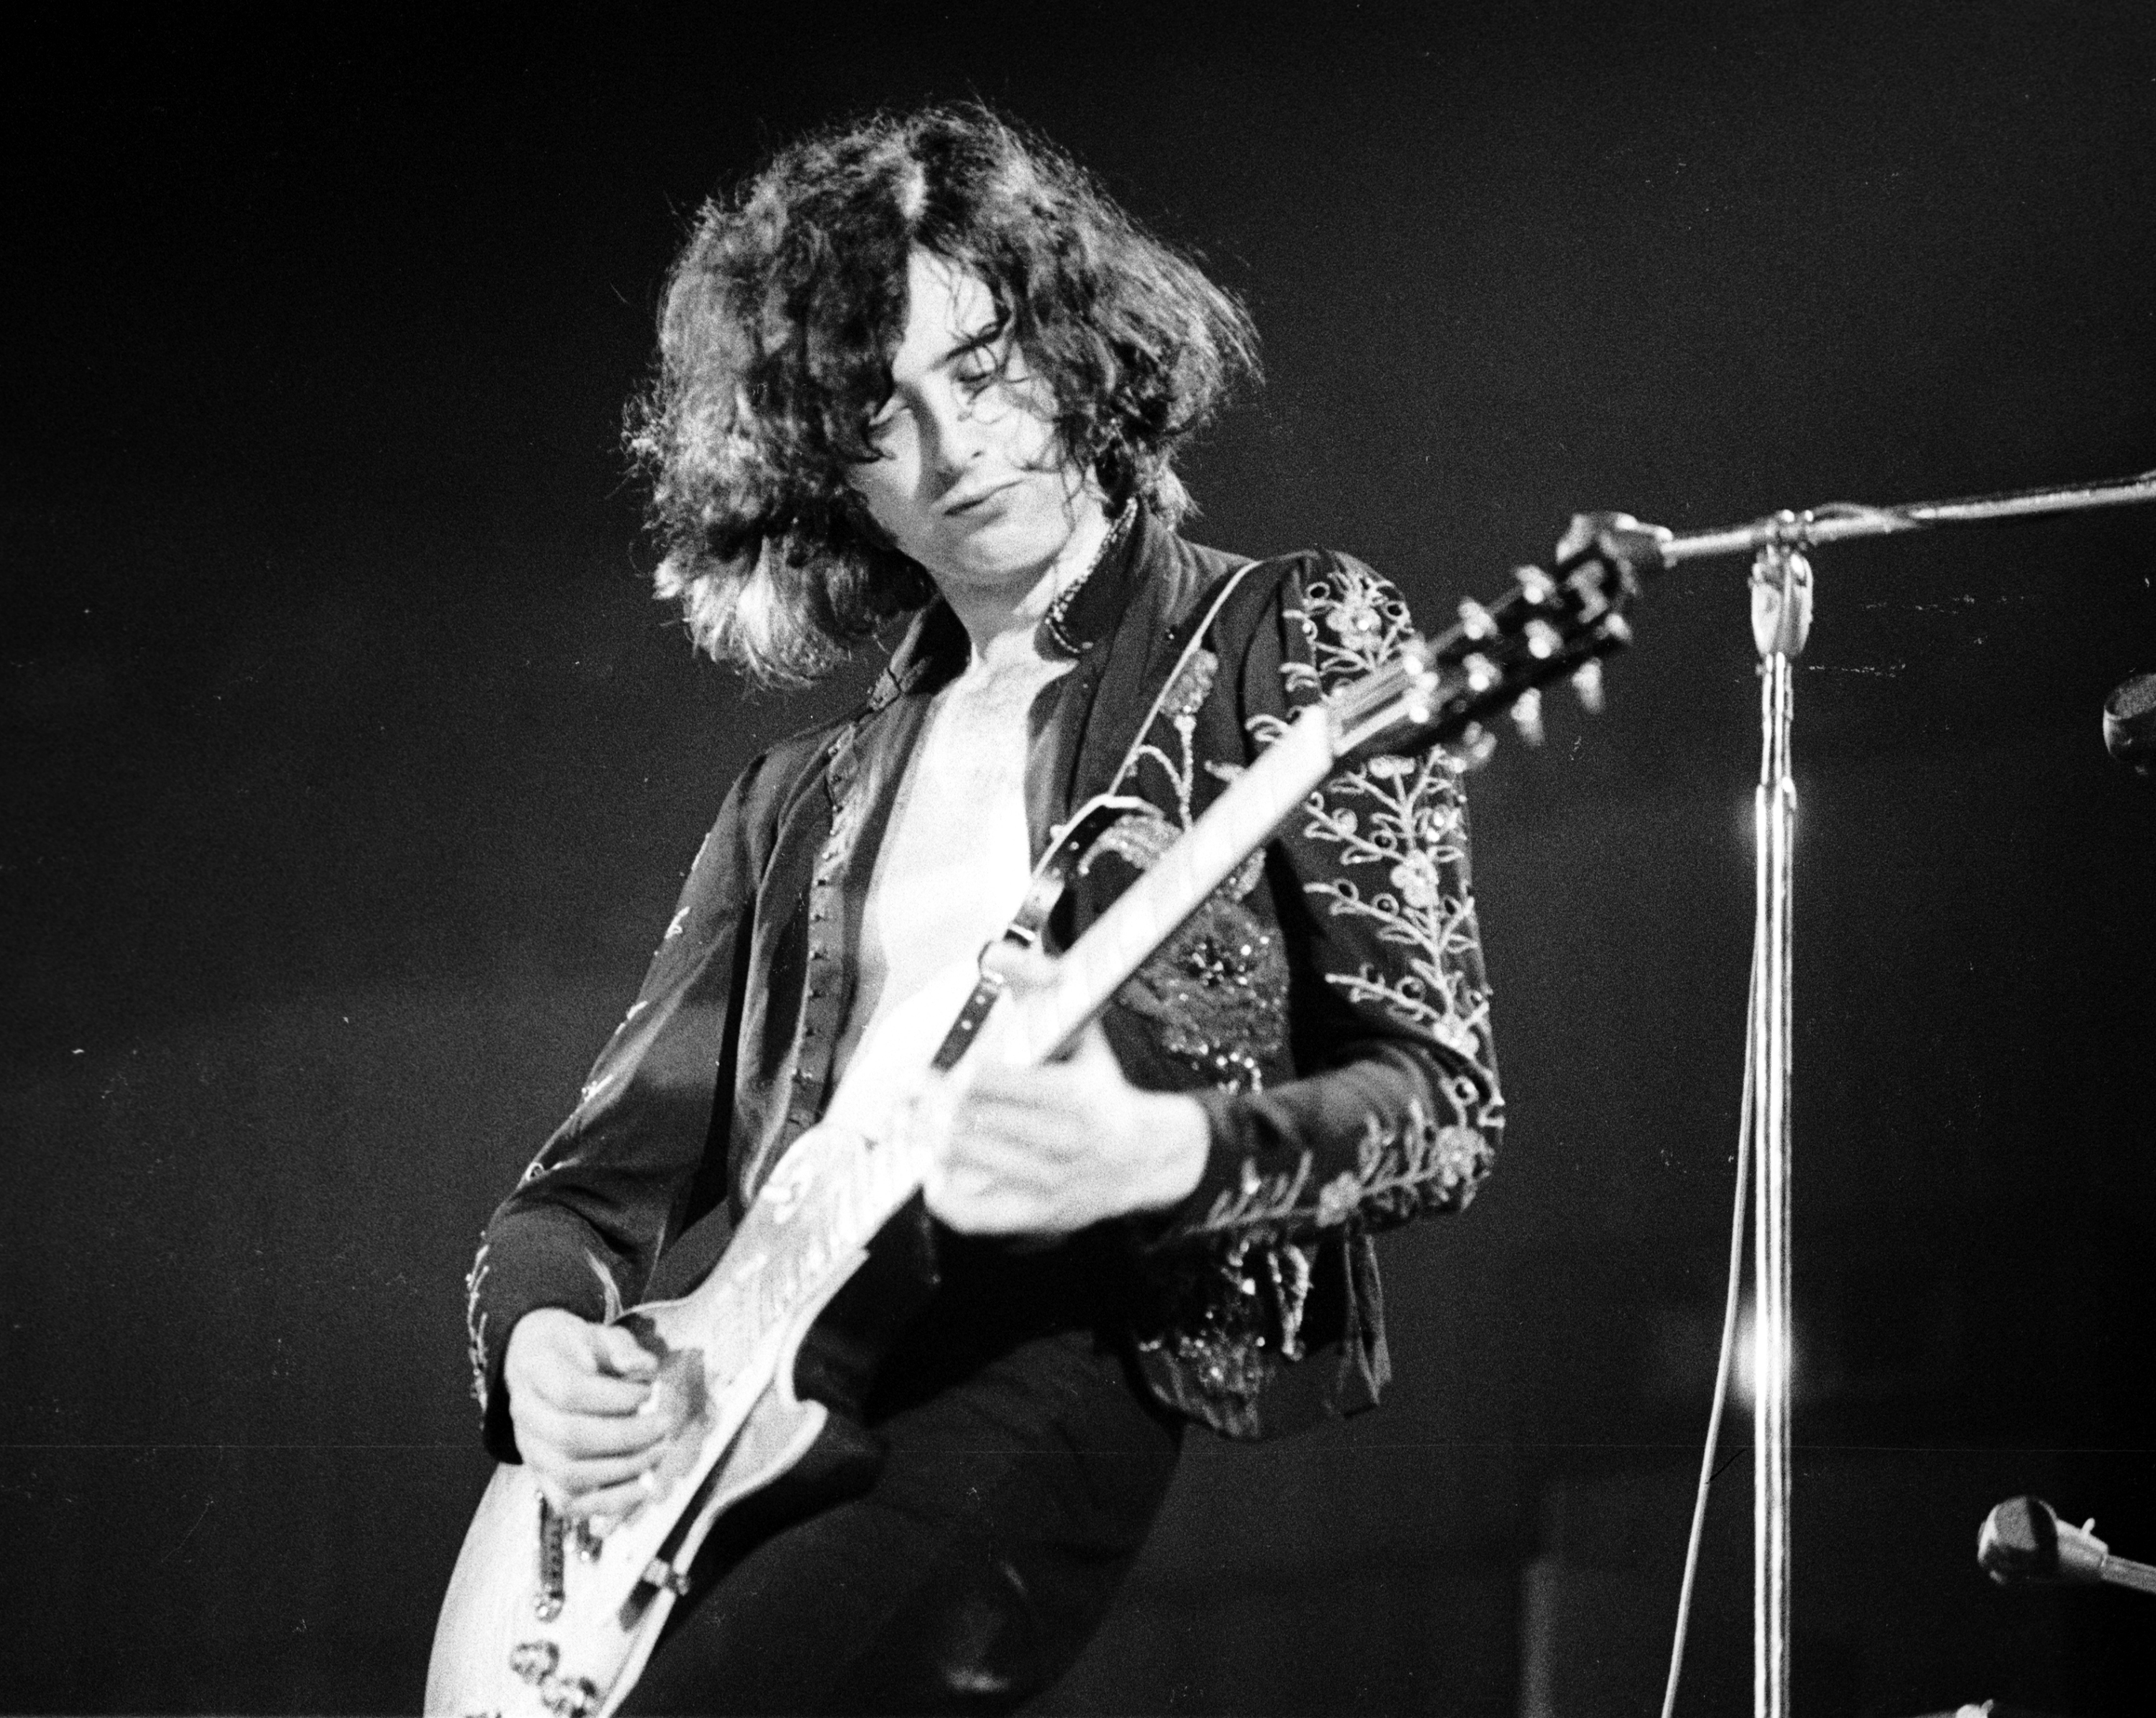 Jimmy Page Page's guitar sounds like six guitars, and the heaviness of his right hand is key to the instant recognizability of Led Zeppelin's sound.